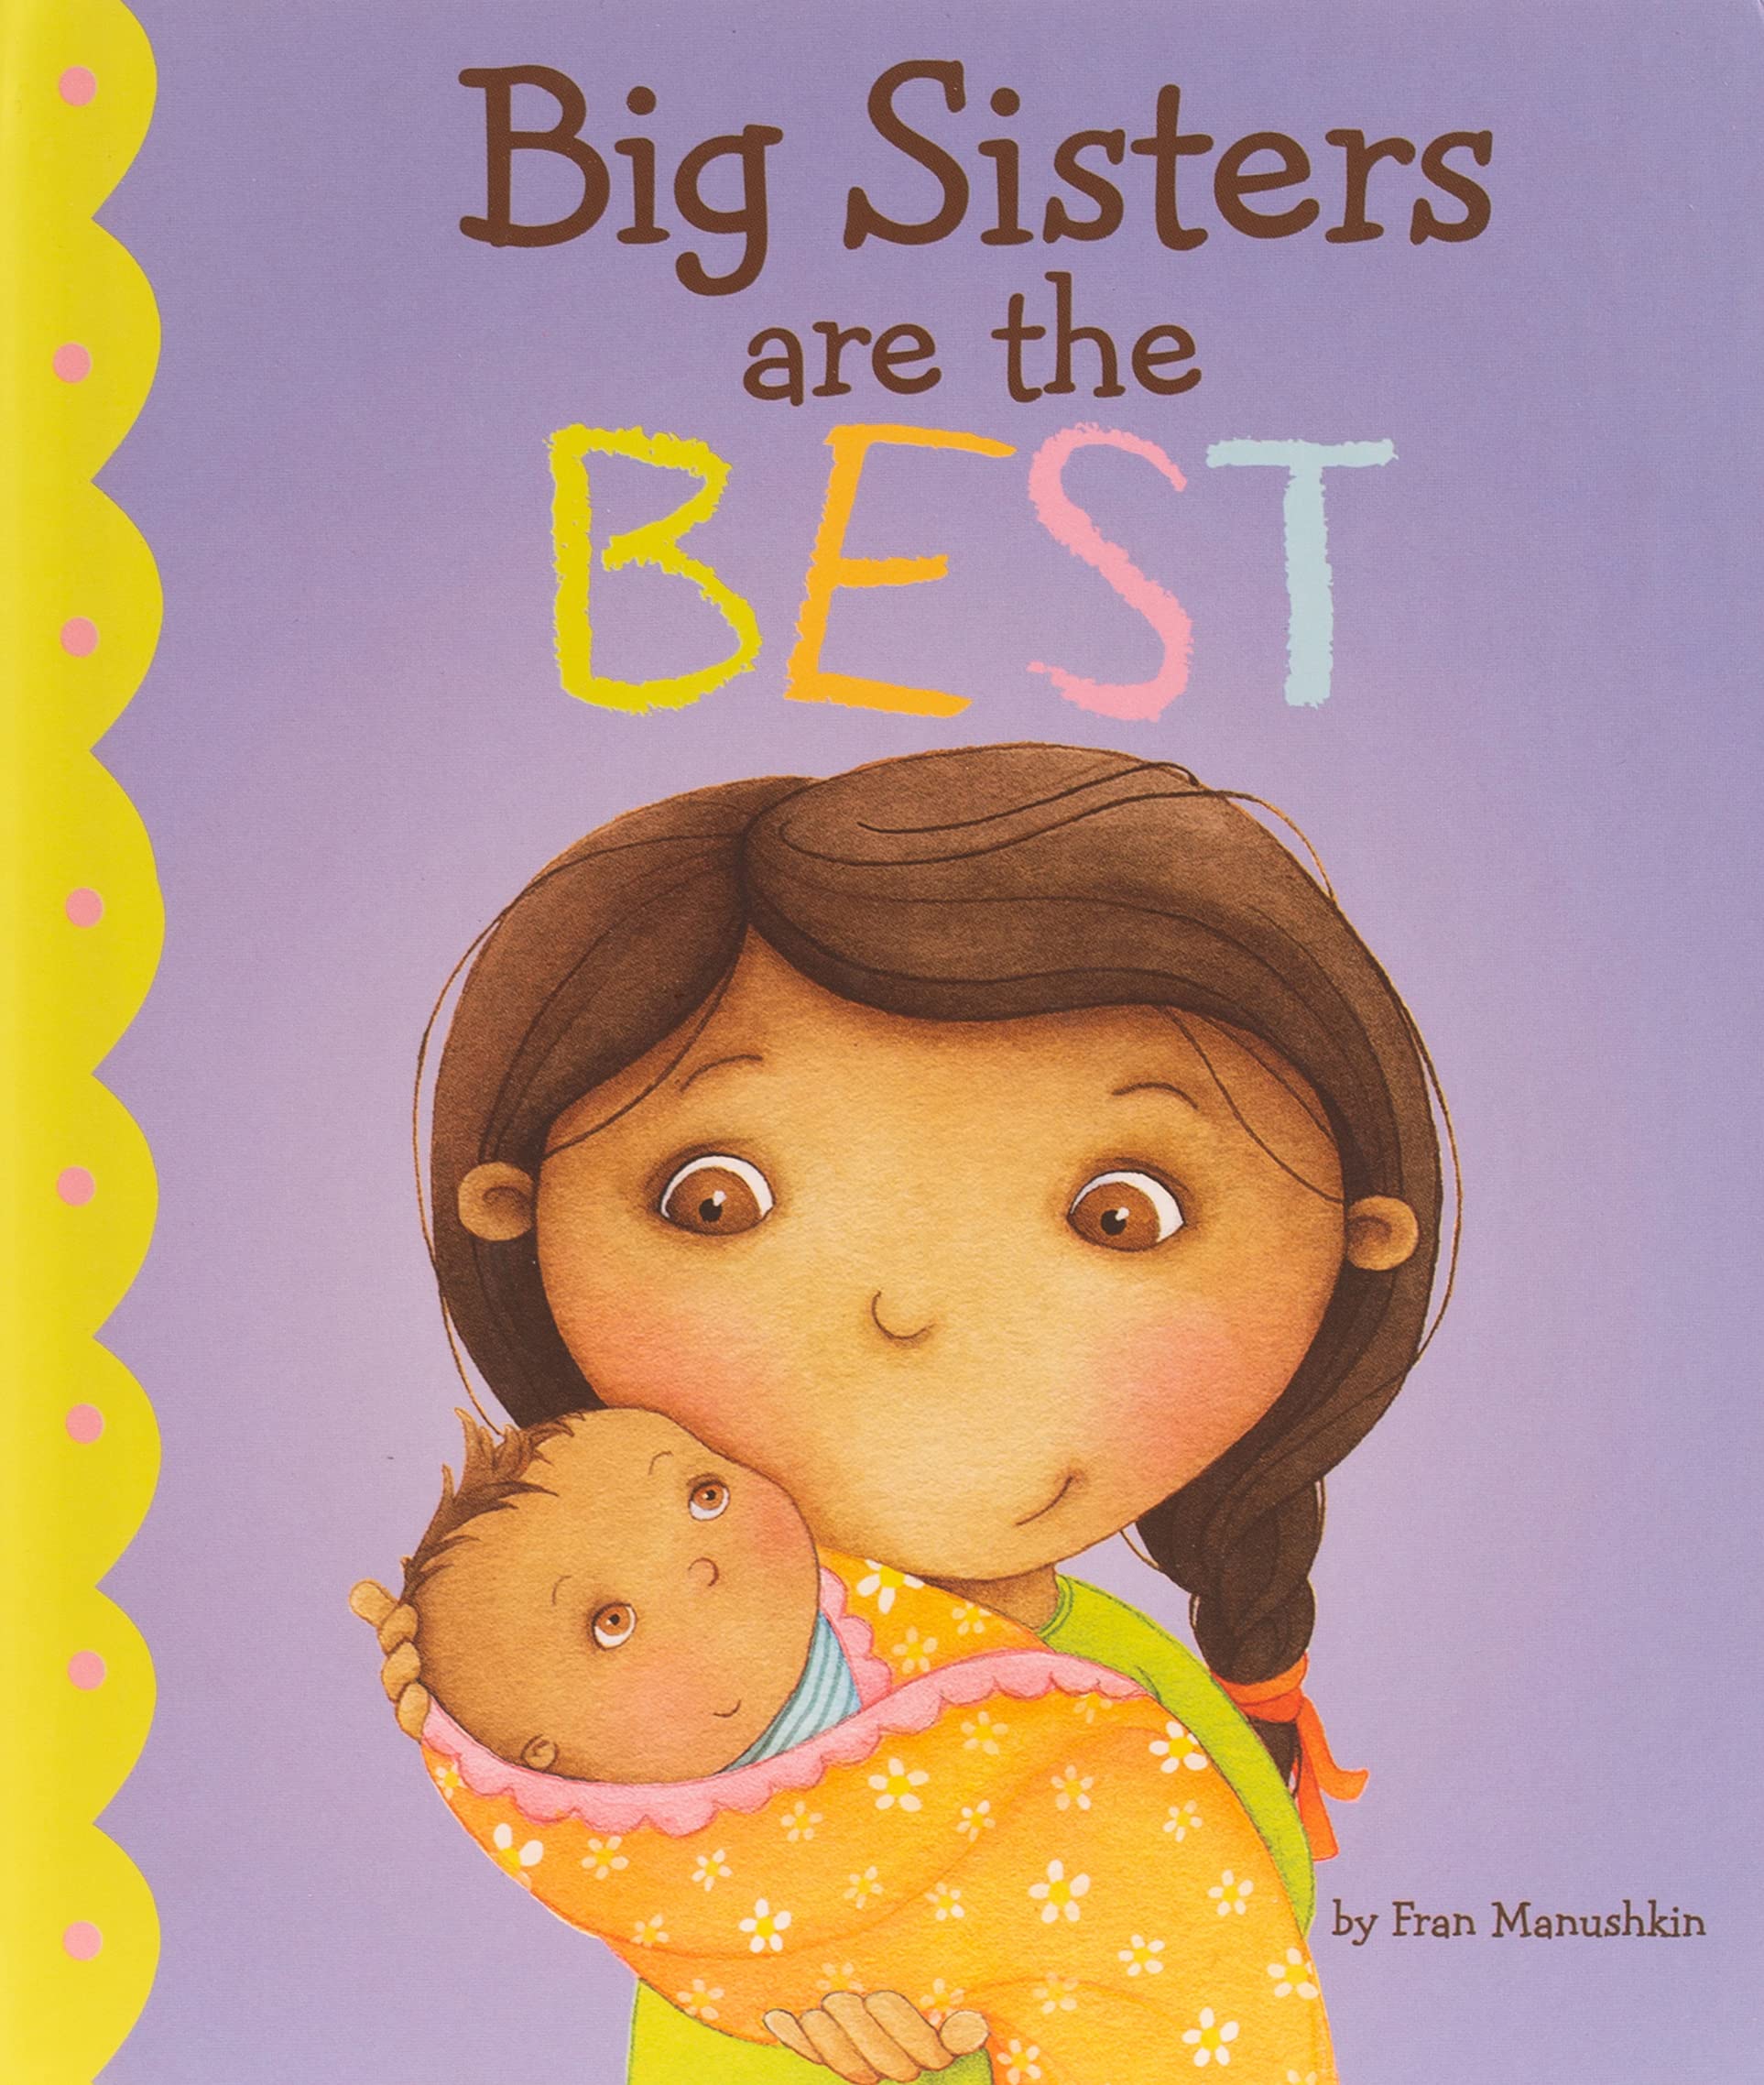 Big sister. Little sister книги английские. The best Издательство. A Gift book to my sister. Baby sister is